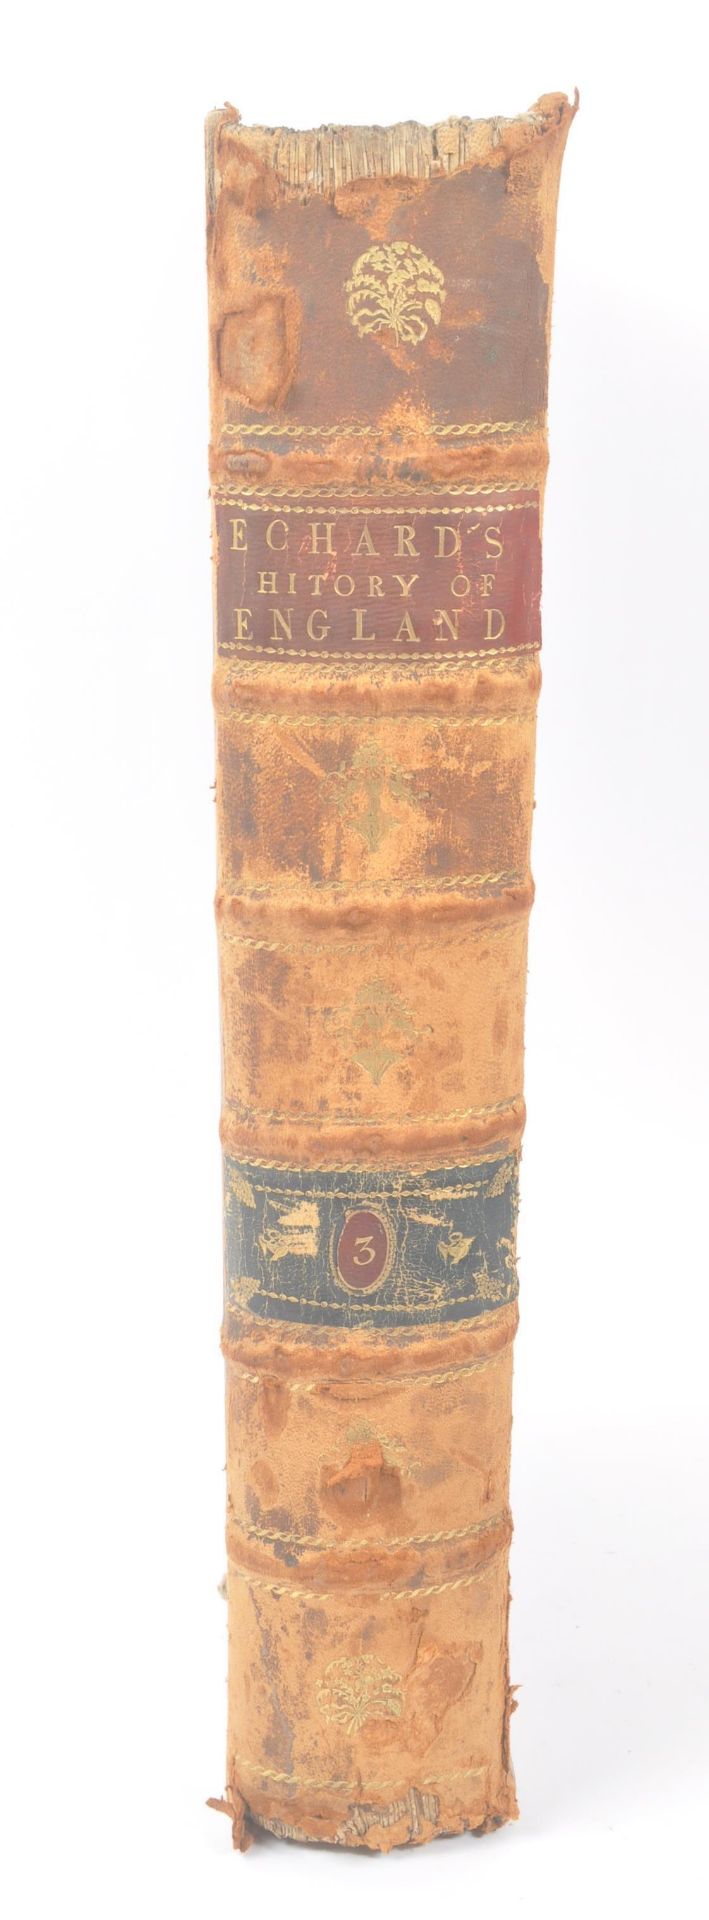 18TH CENTURY BOOK BY LAURENCE ECHARD - HISTORY OF ENGLAND - Image 3 of 6